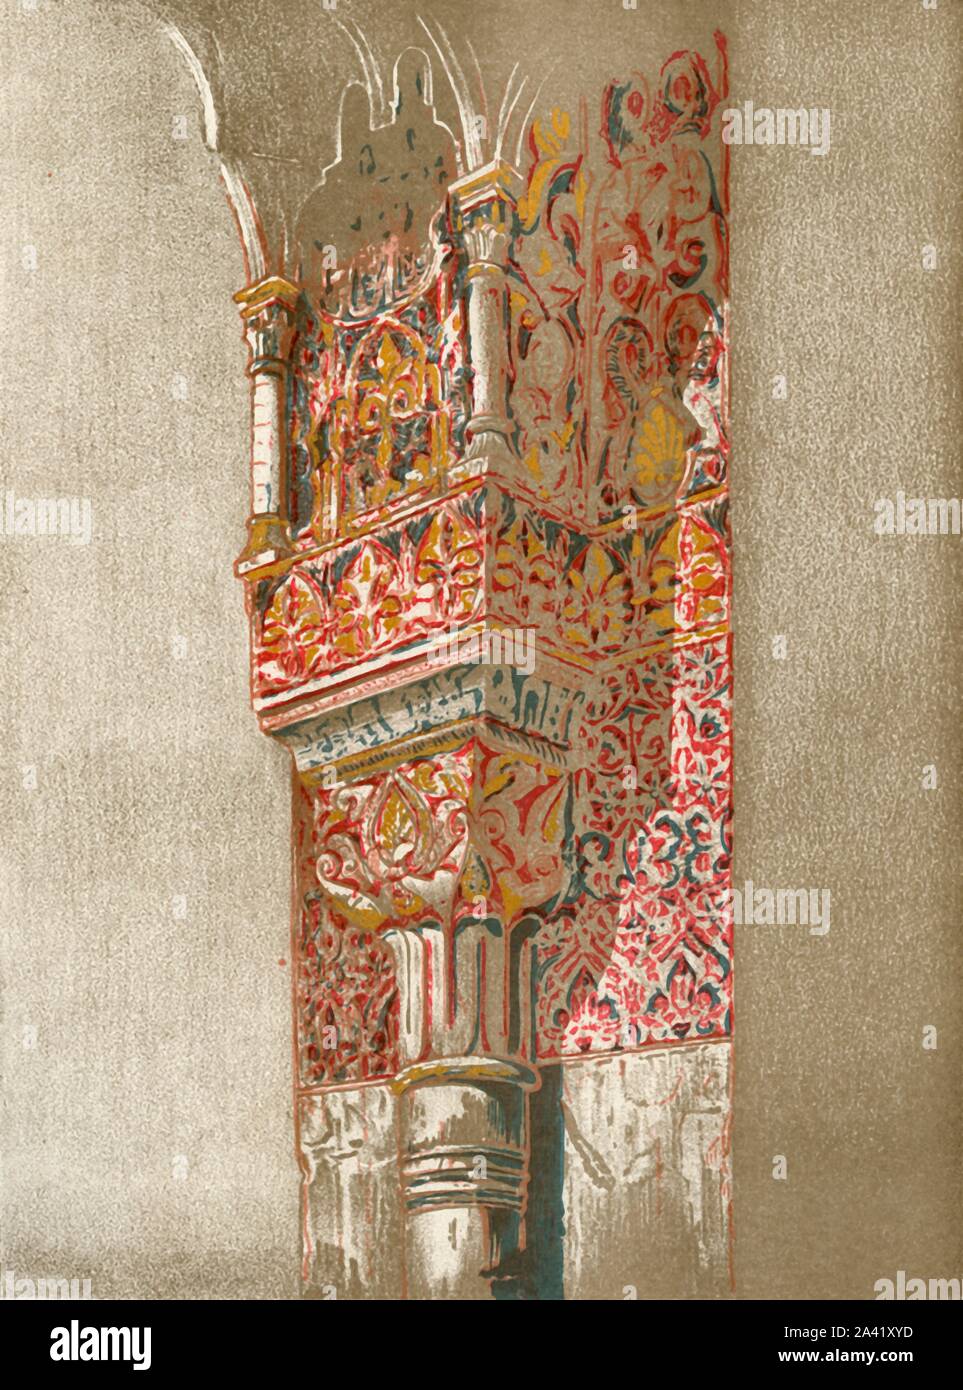 'Actual state of the Colours', 1907. Interior decoration in the palace of the Alhambra, Granada, Spain, which had been allowed to fall into a state of disrepair. It has since been extensively restored. The buildings mainly dates from the 14th century. Colour plate 44 from &quot;The Alhambra: being a brief record of the Arabian conquest of the Peninsula with a particular account of the Mohammedan architecture and decoration&quot; by Albert F. Calvert. [John Lane, London &amp; New York, 1907] Stock Photo